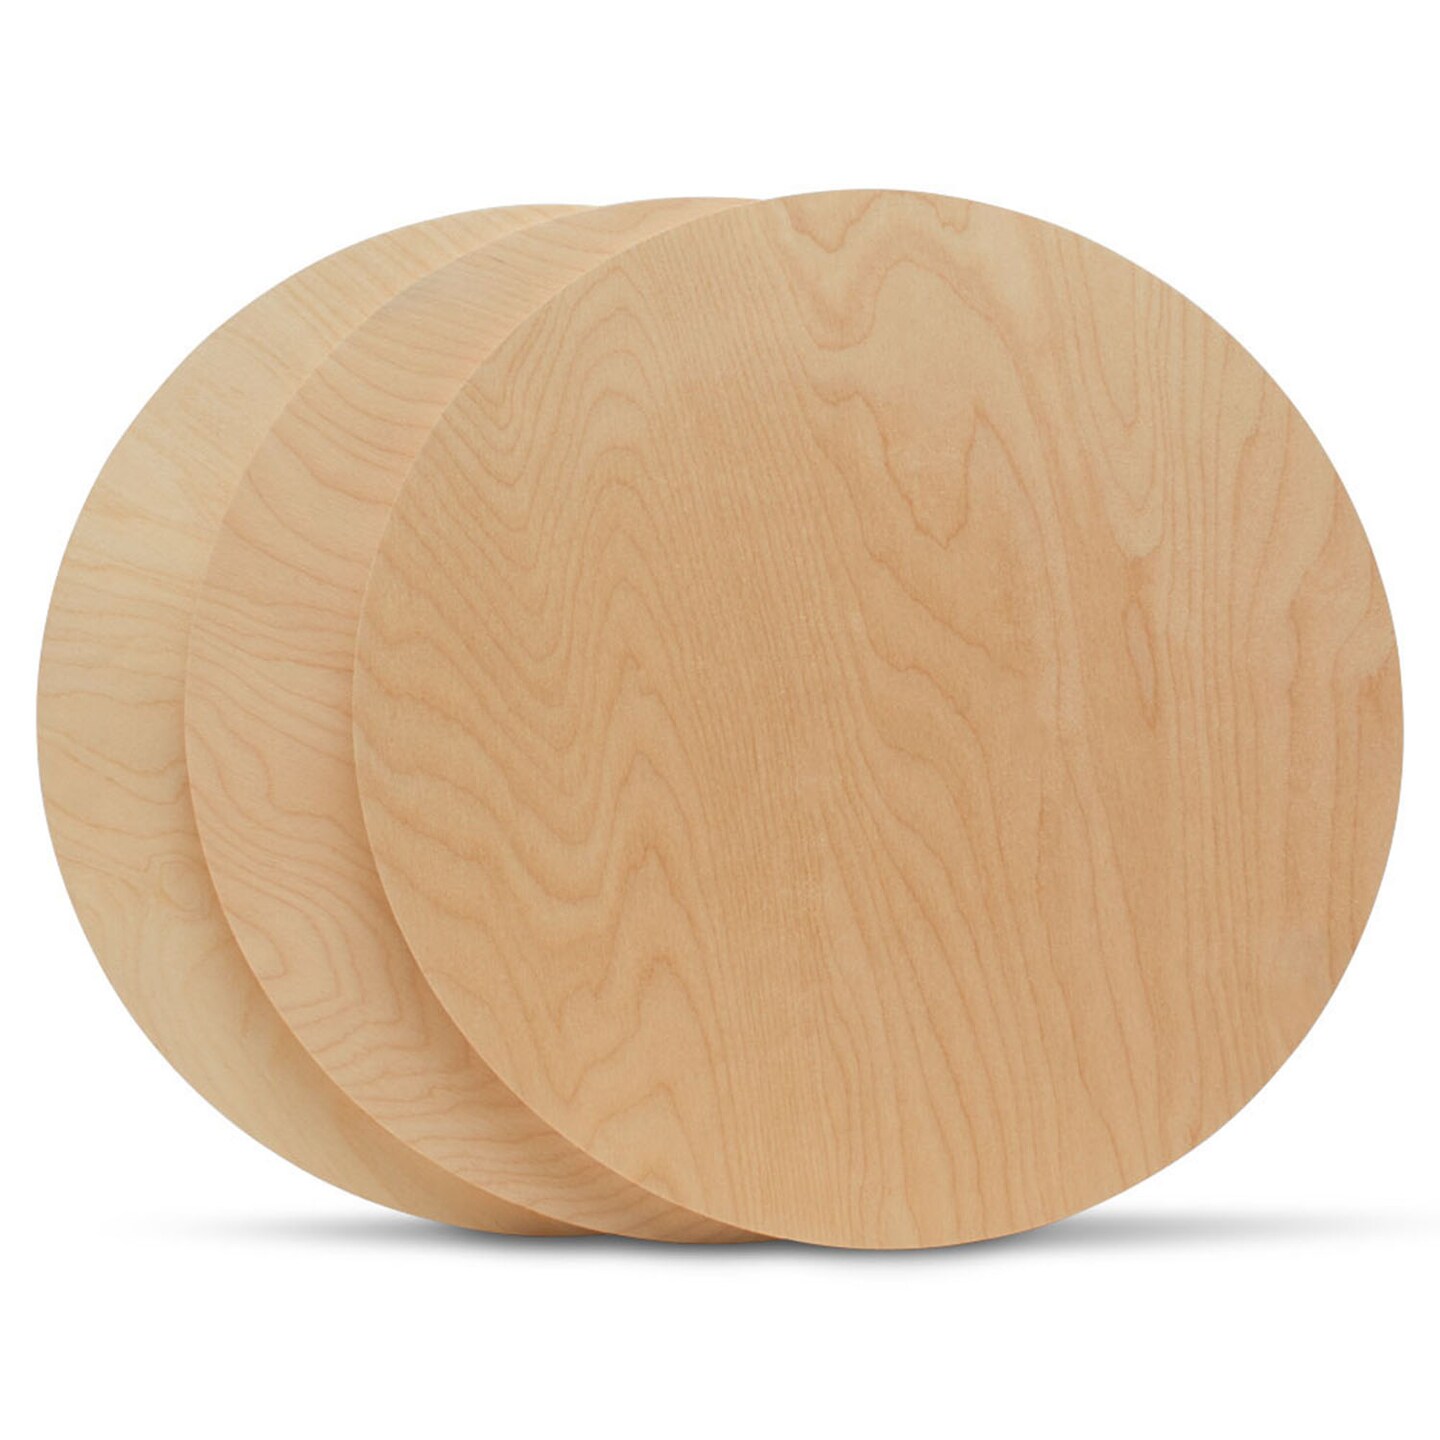  Round Wooden Plaques for Crafts, Natural Pine